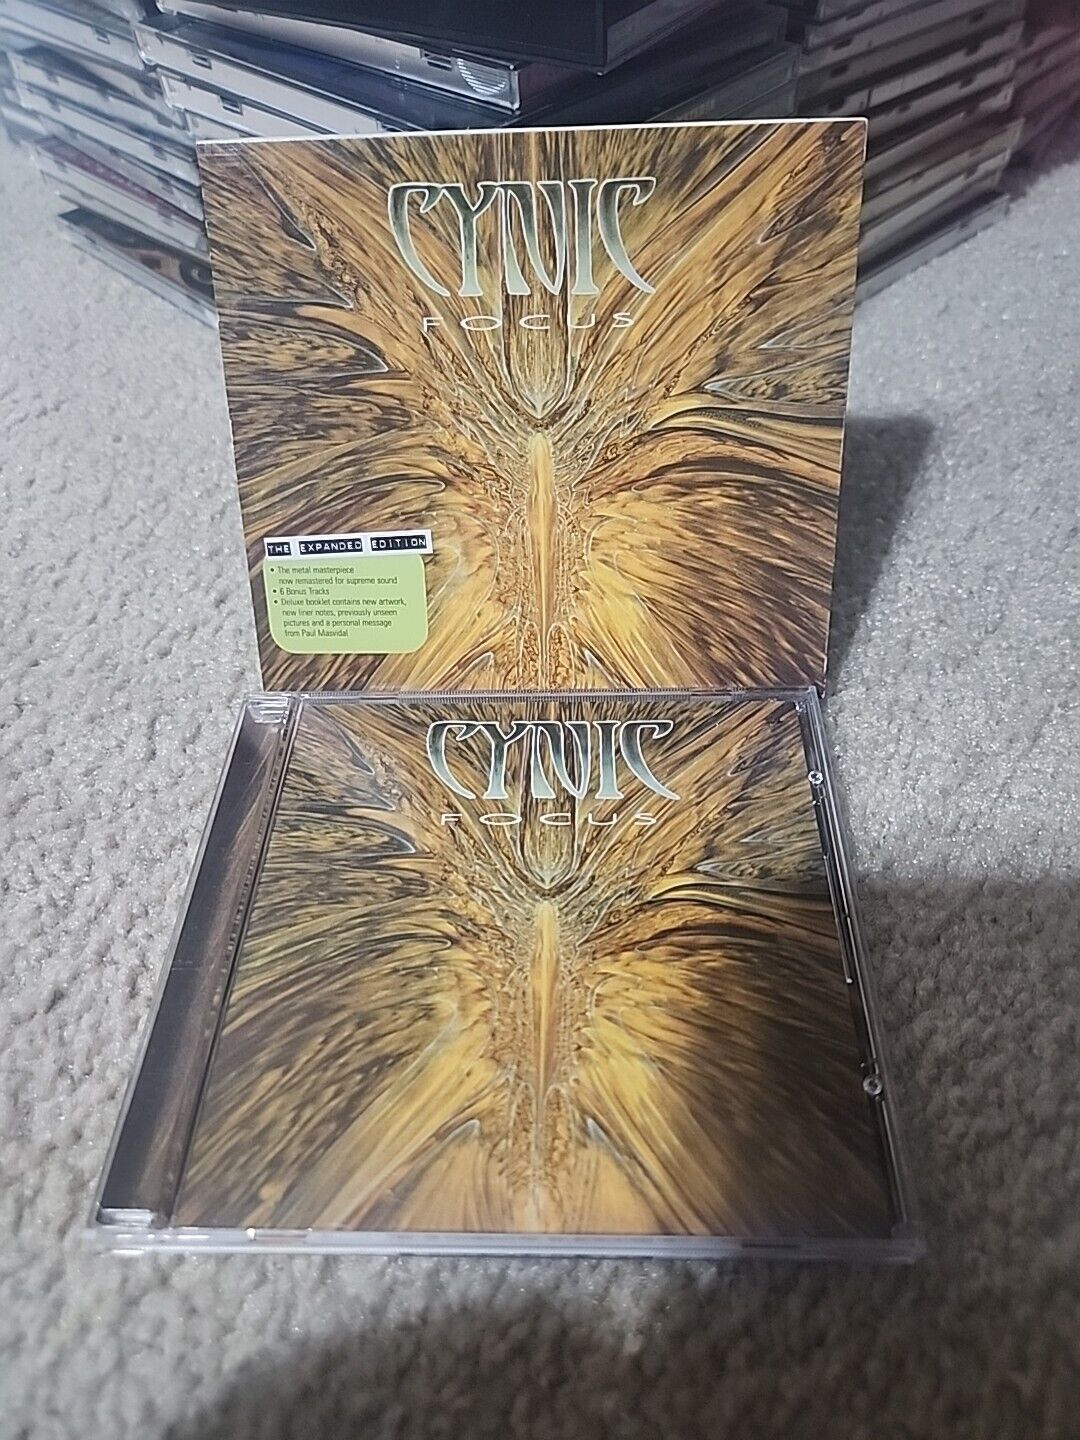 Cynic Focus Cd Expanded Edition W/slipcover EX Rare